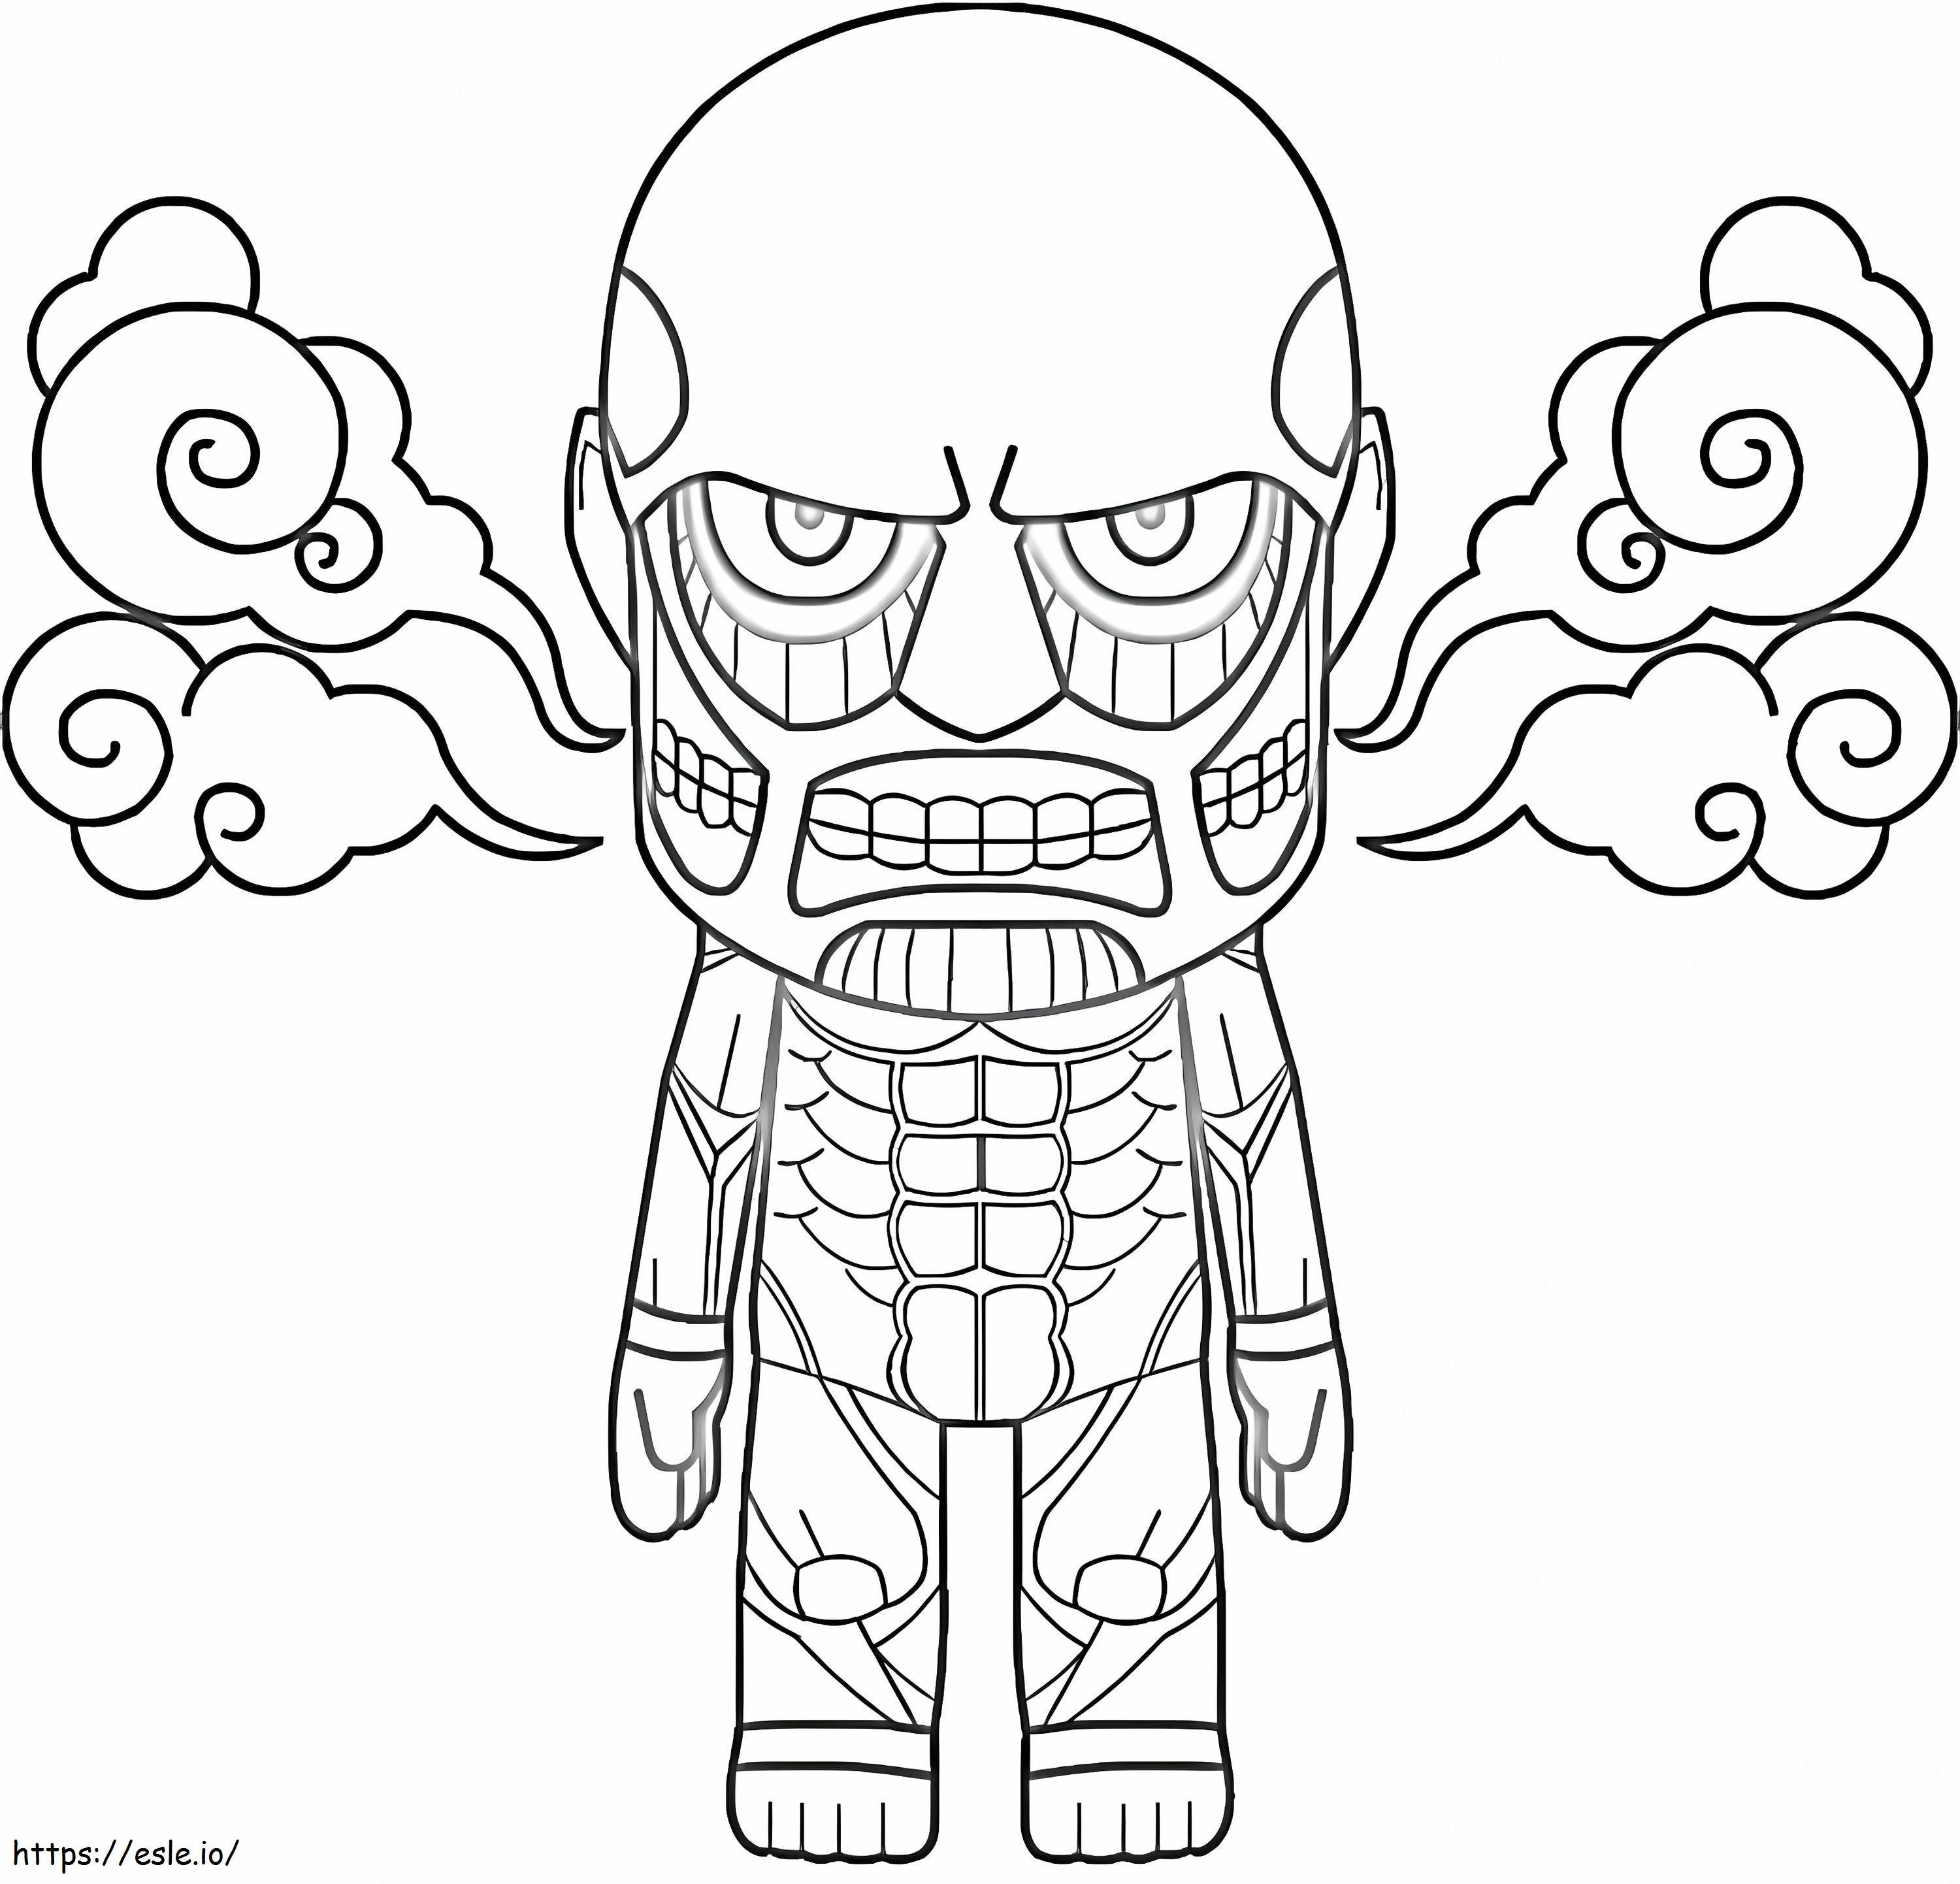 Titan Colossal Chibi coloring page